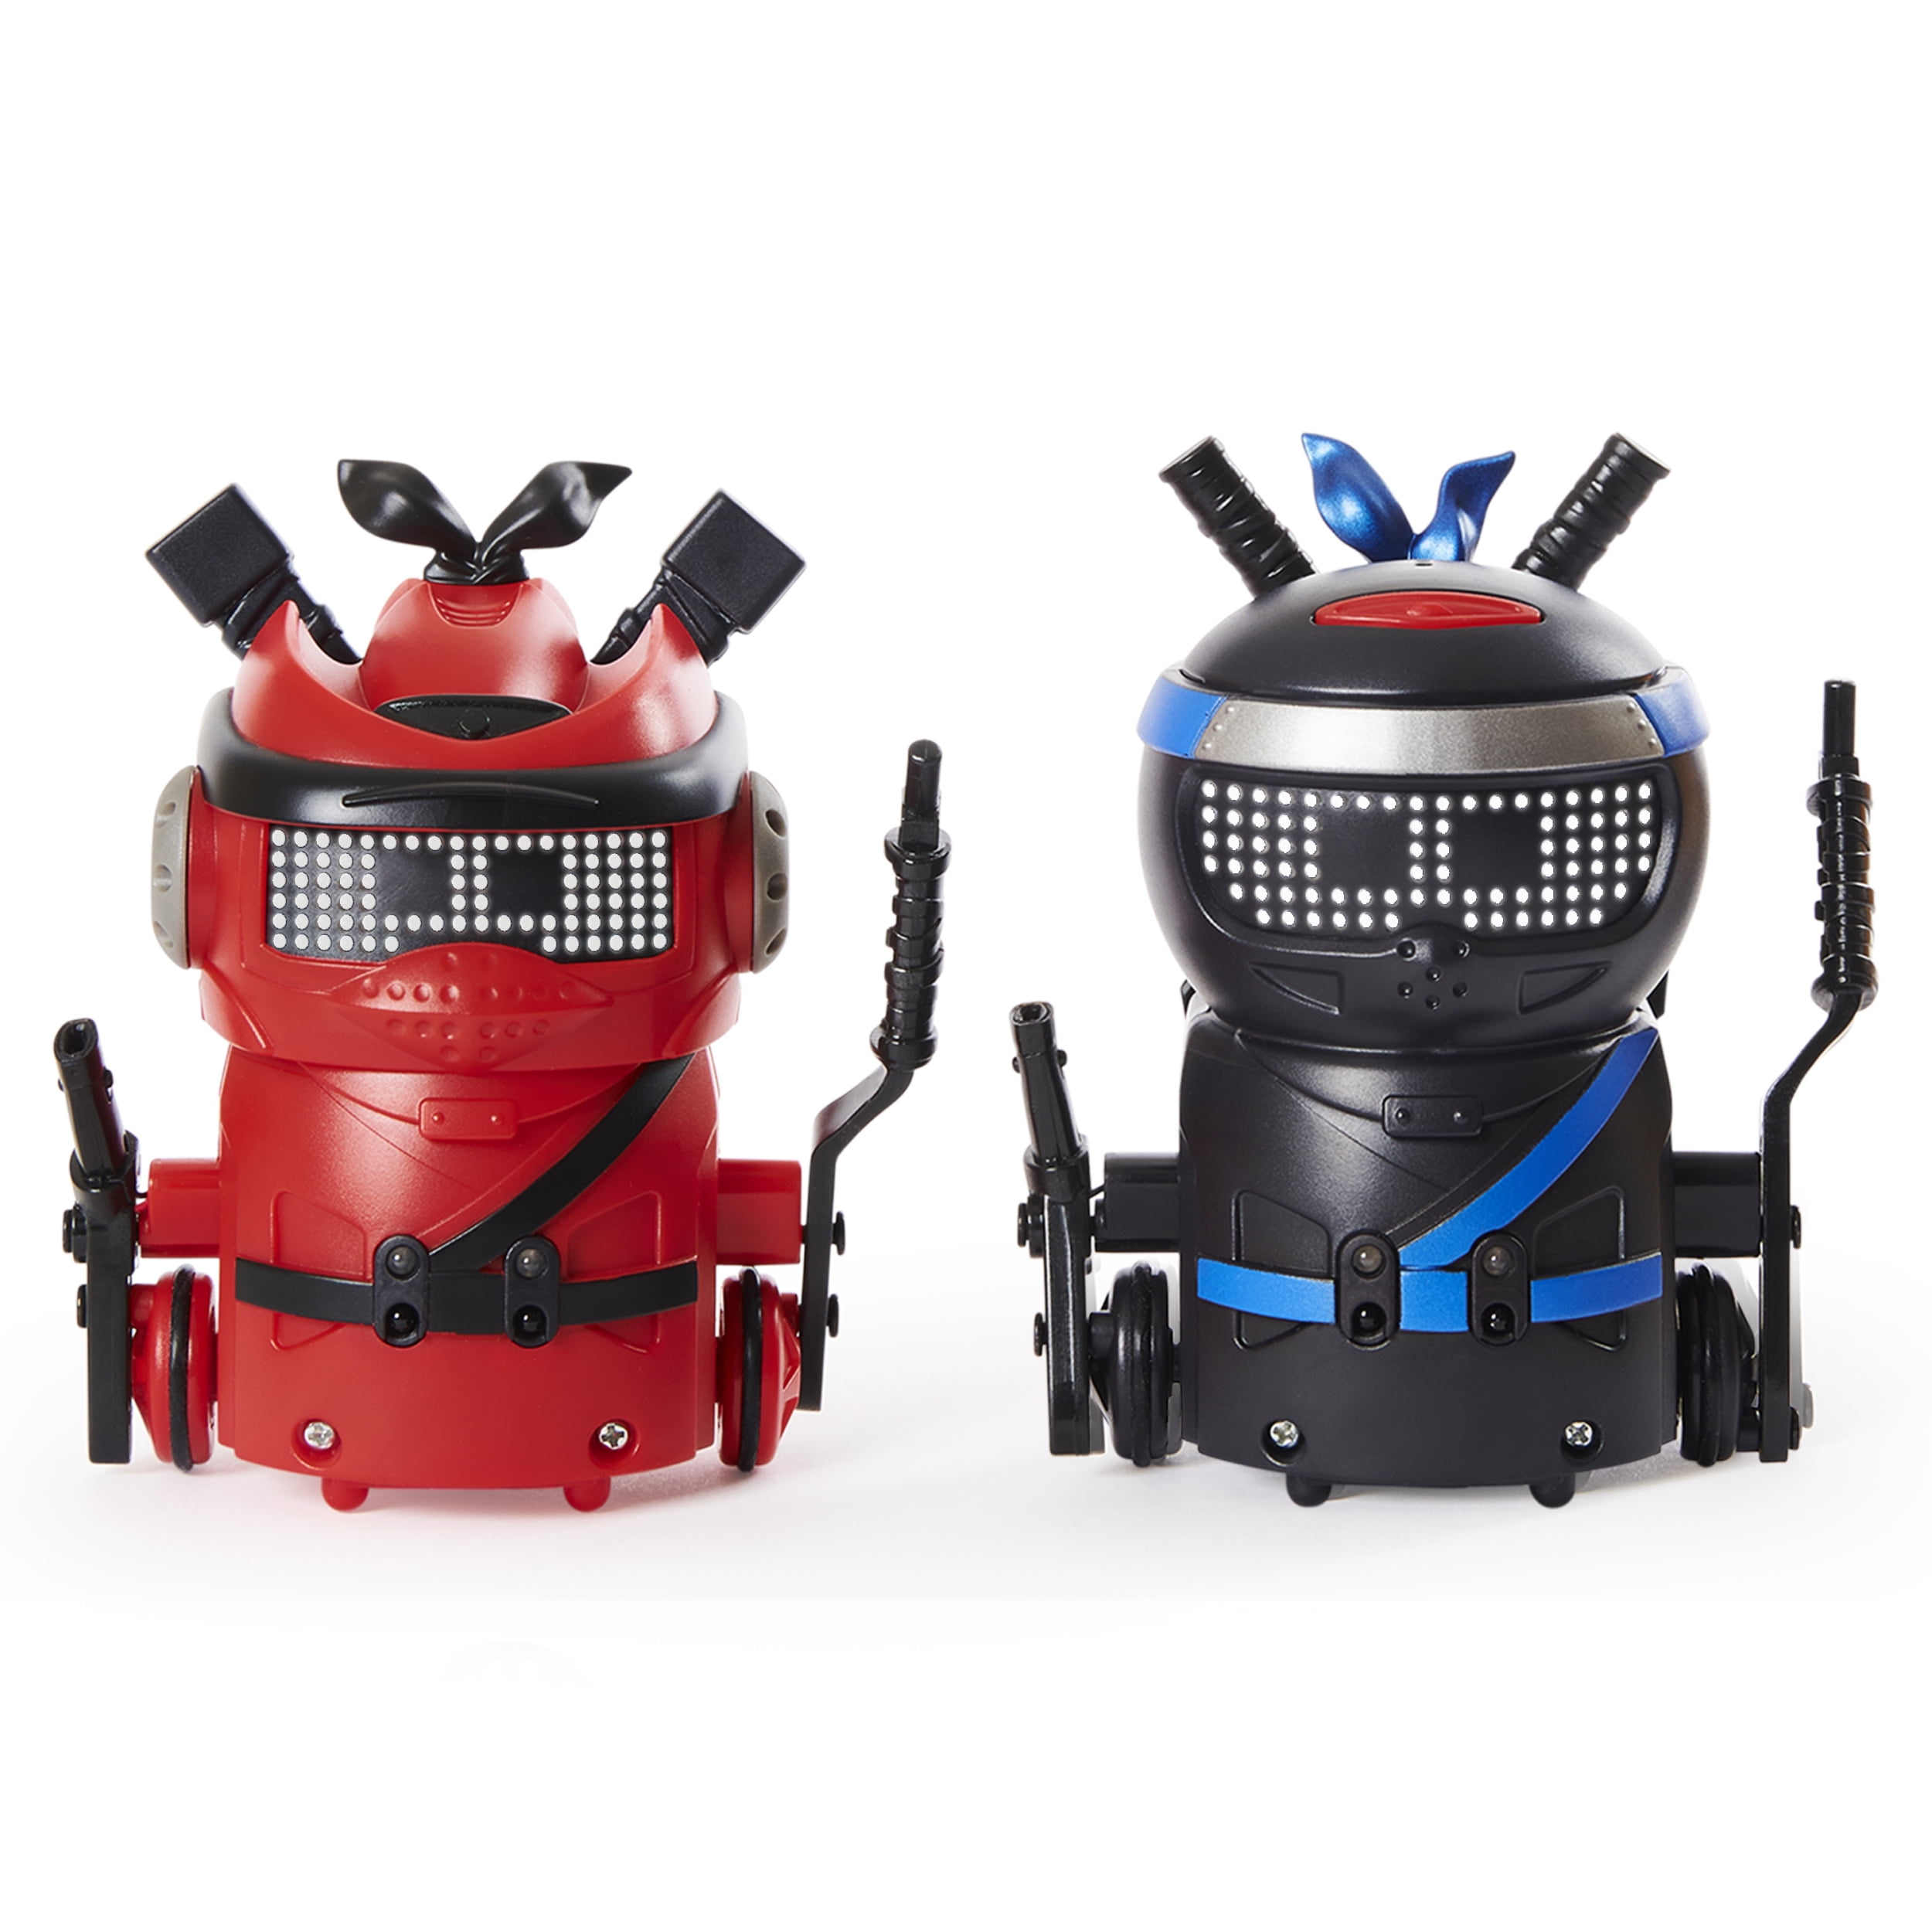 Ninja Bots 2-pack Hilarious Battling Robots Black & Red With 6 Fight Accessories for sale online 